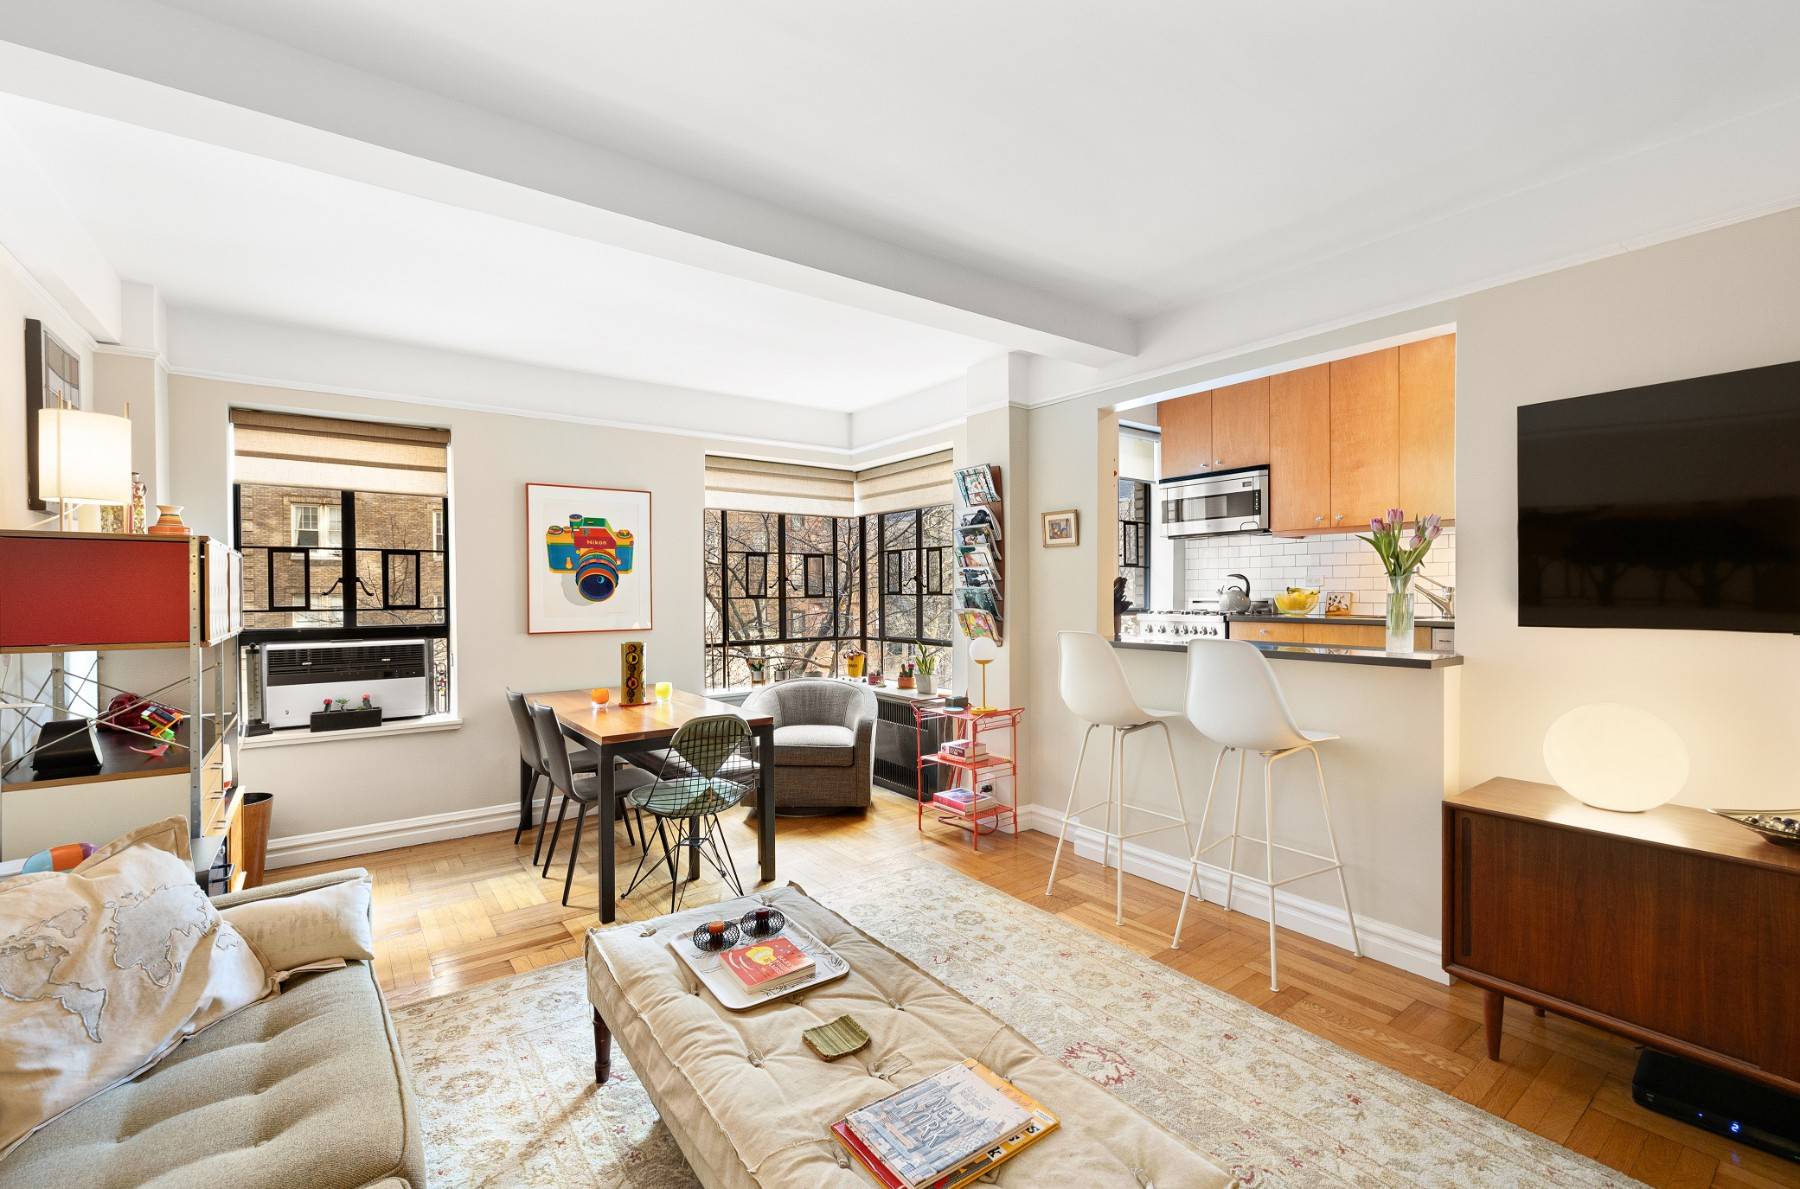 Welcome to Apartment 4F, a spacious studio measuring roughly 700 square fee to which the current owners brought a ton of creativity and designed a beautiful home that is move ...